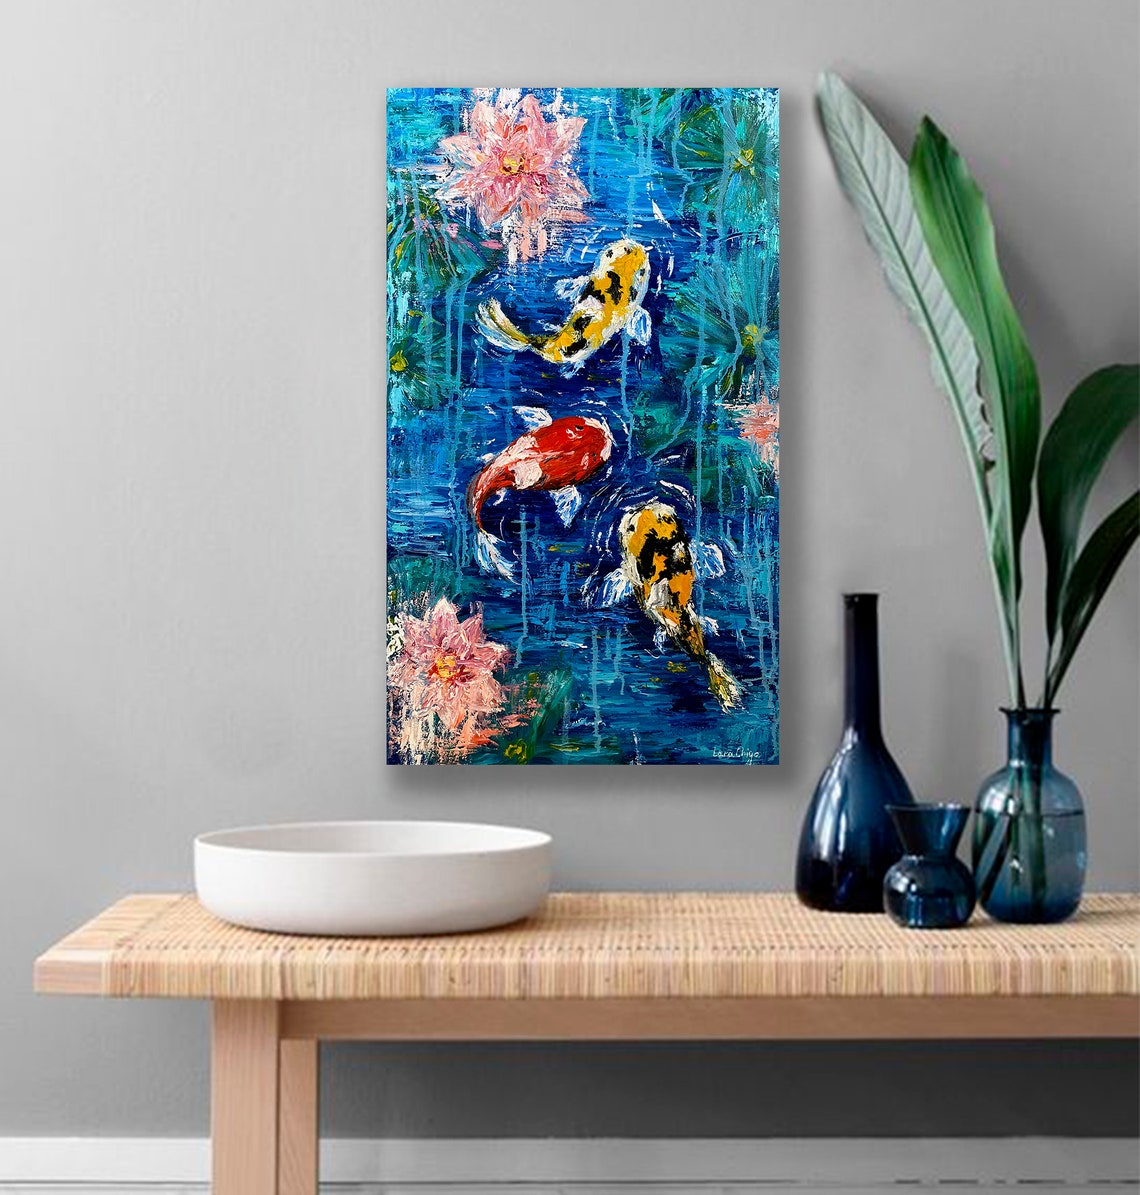 Original Oil On Canvas Modern Abstract Koi Fish Pond Painting Etsy